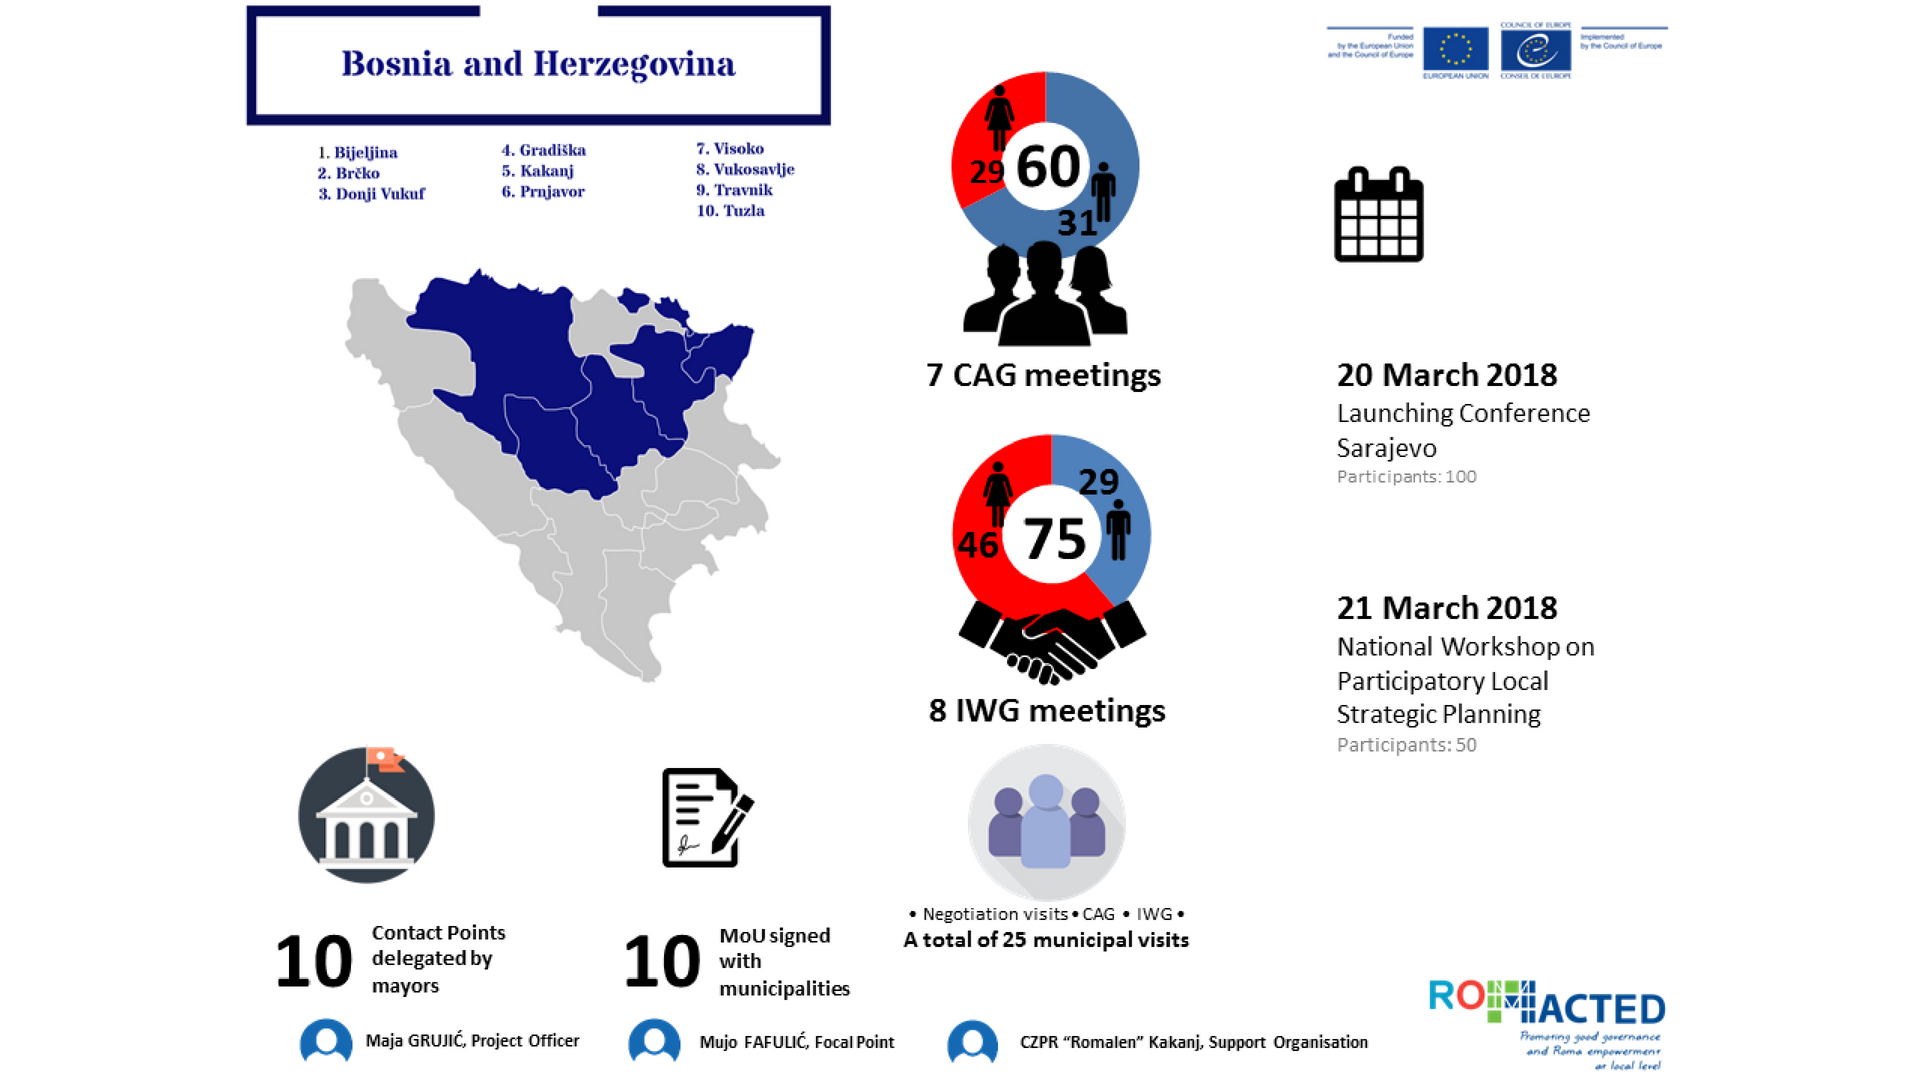 Info graphic summarizes developments of the first six-month implementation in 2018 in Bosnia and Herzegovina